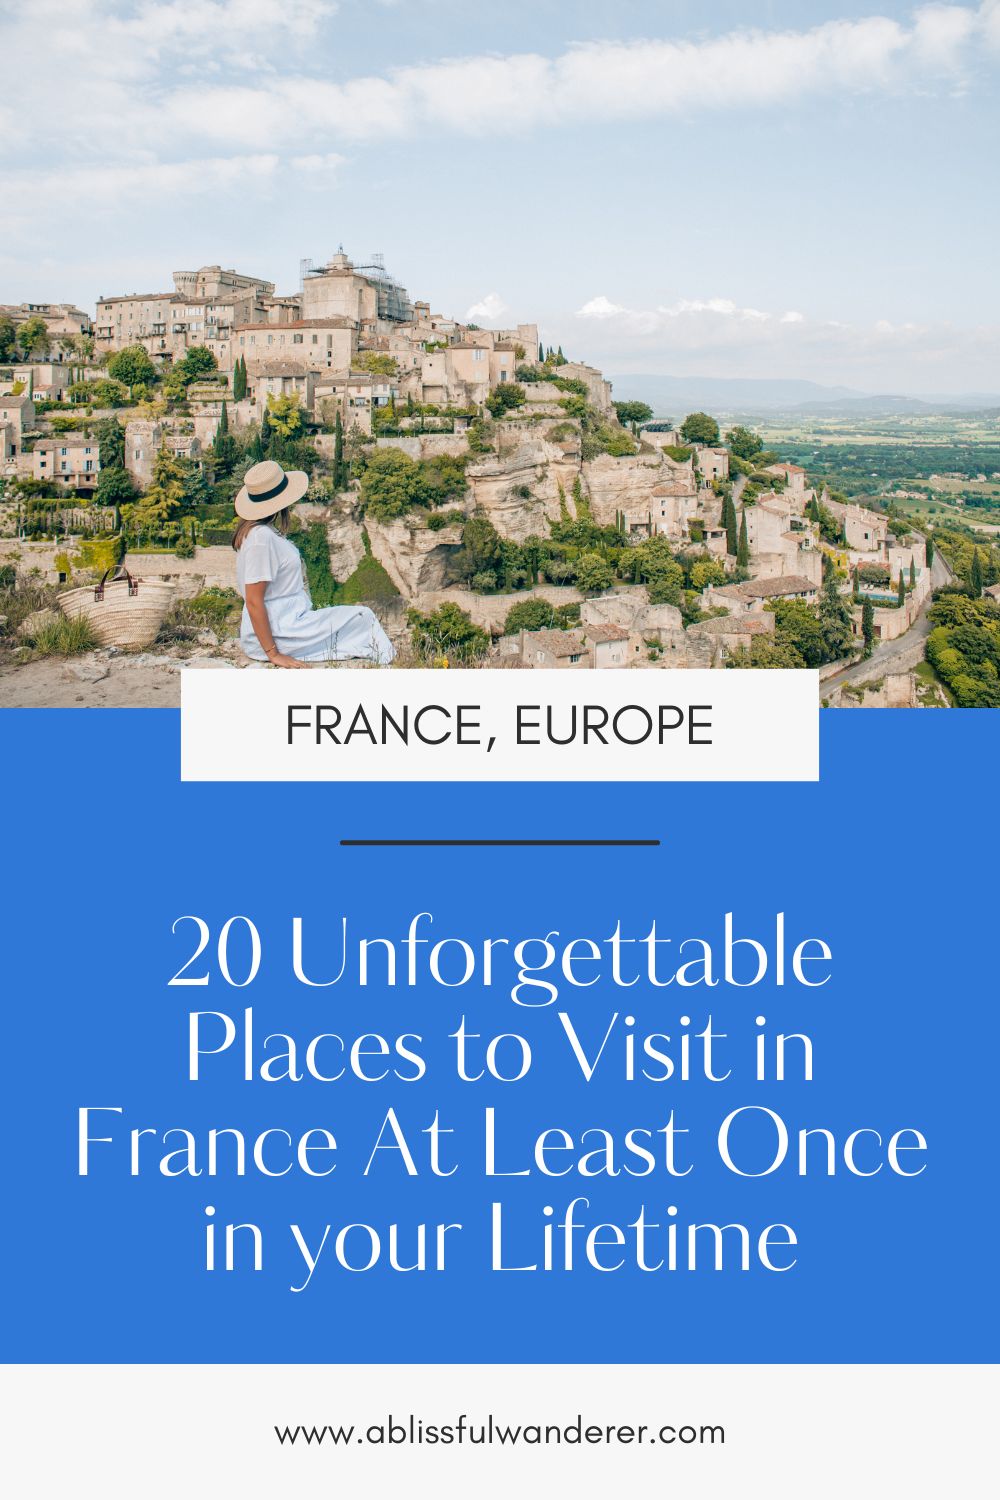 A rich pin image with an image of Gordes, France and the words "20 unforgettable places to visit in France at least once in your lifetime"